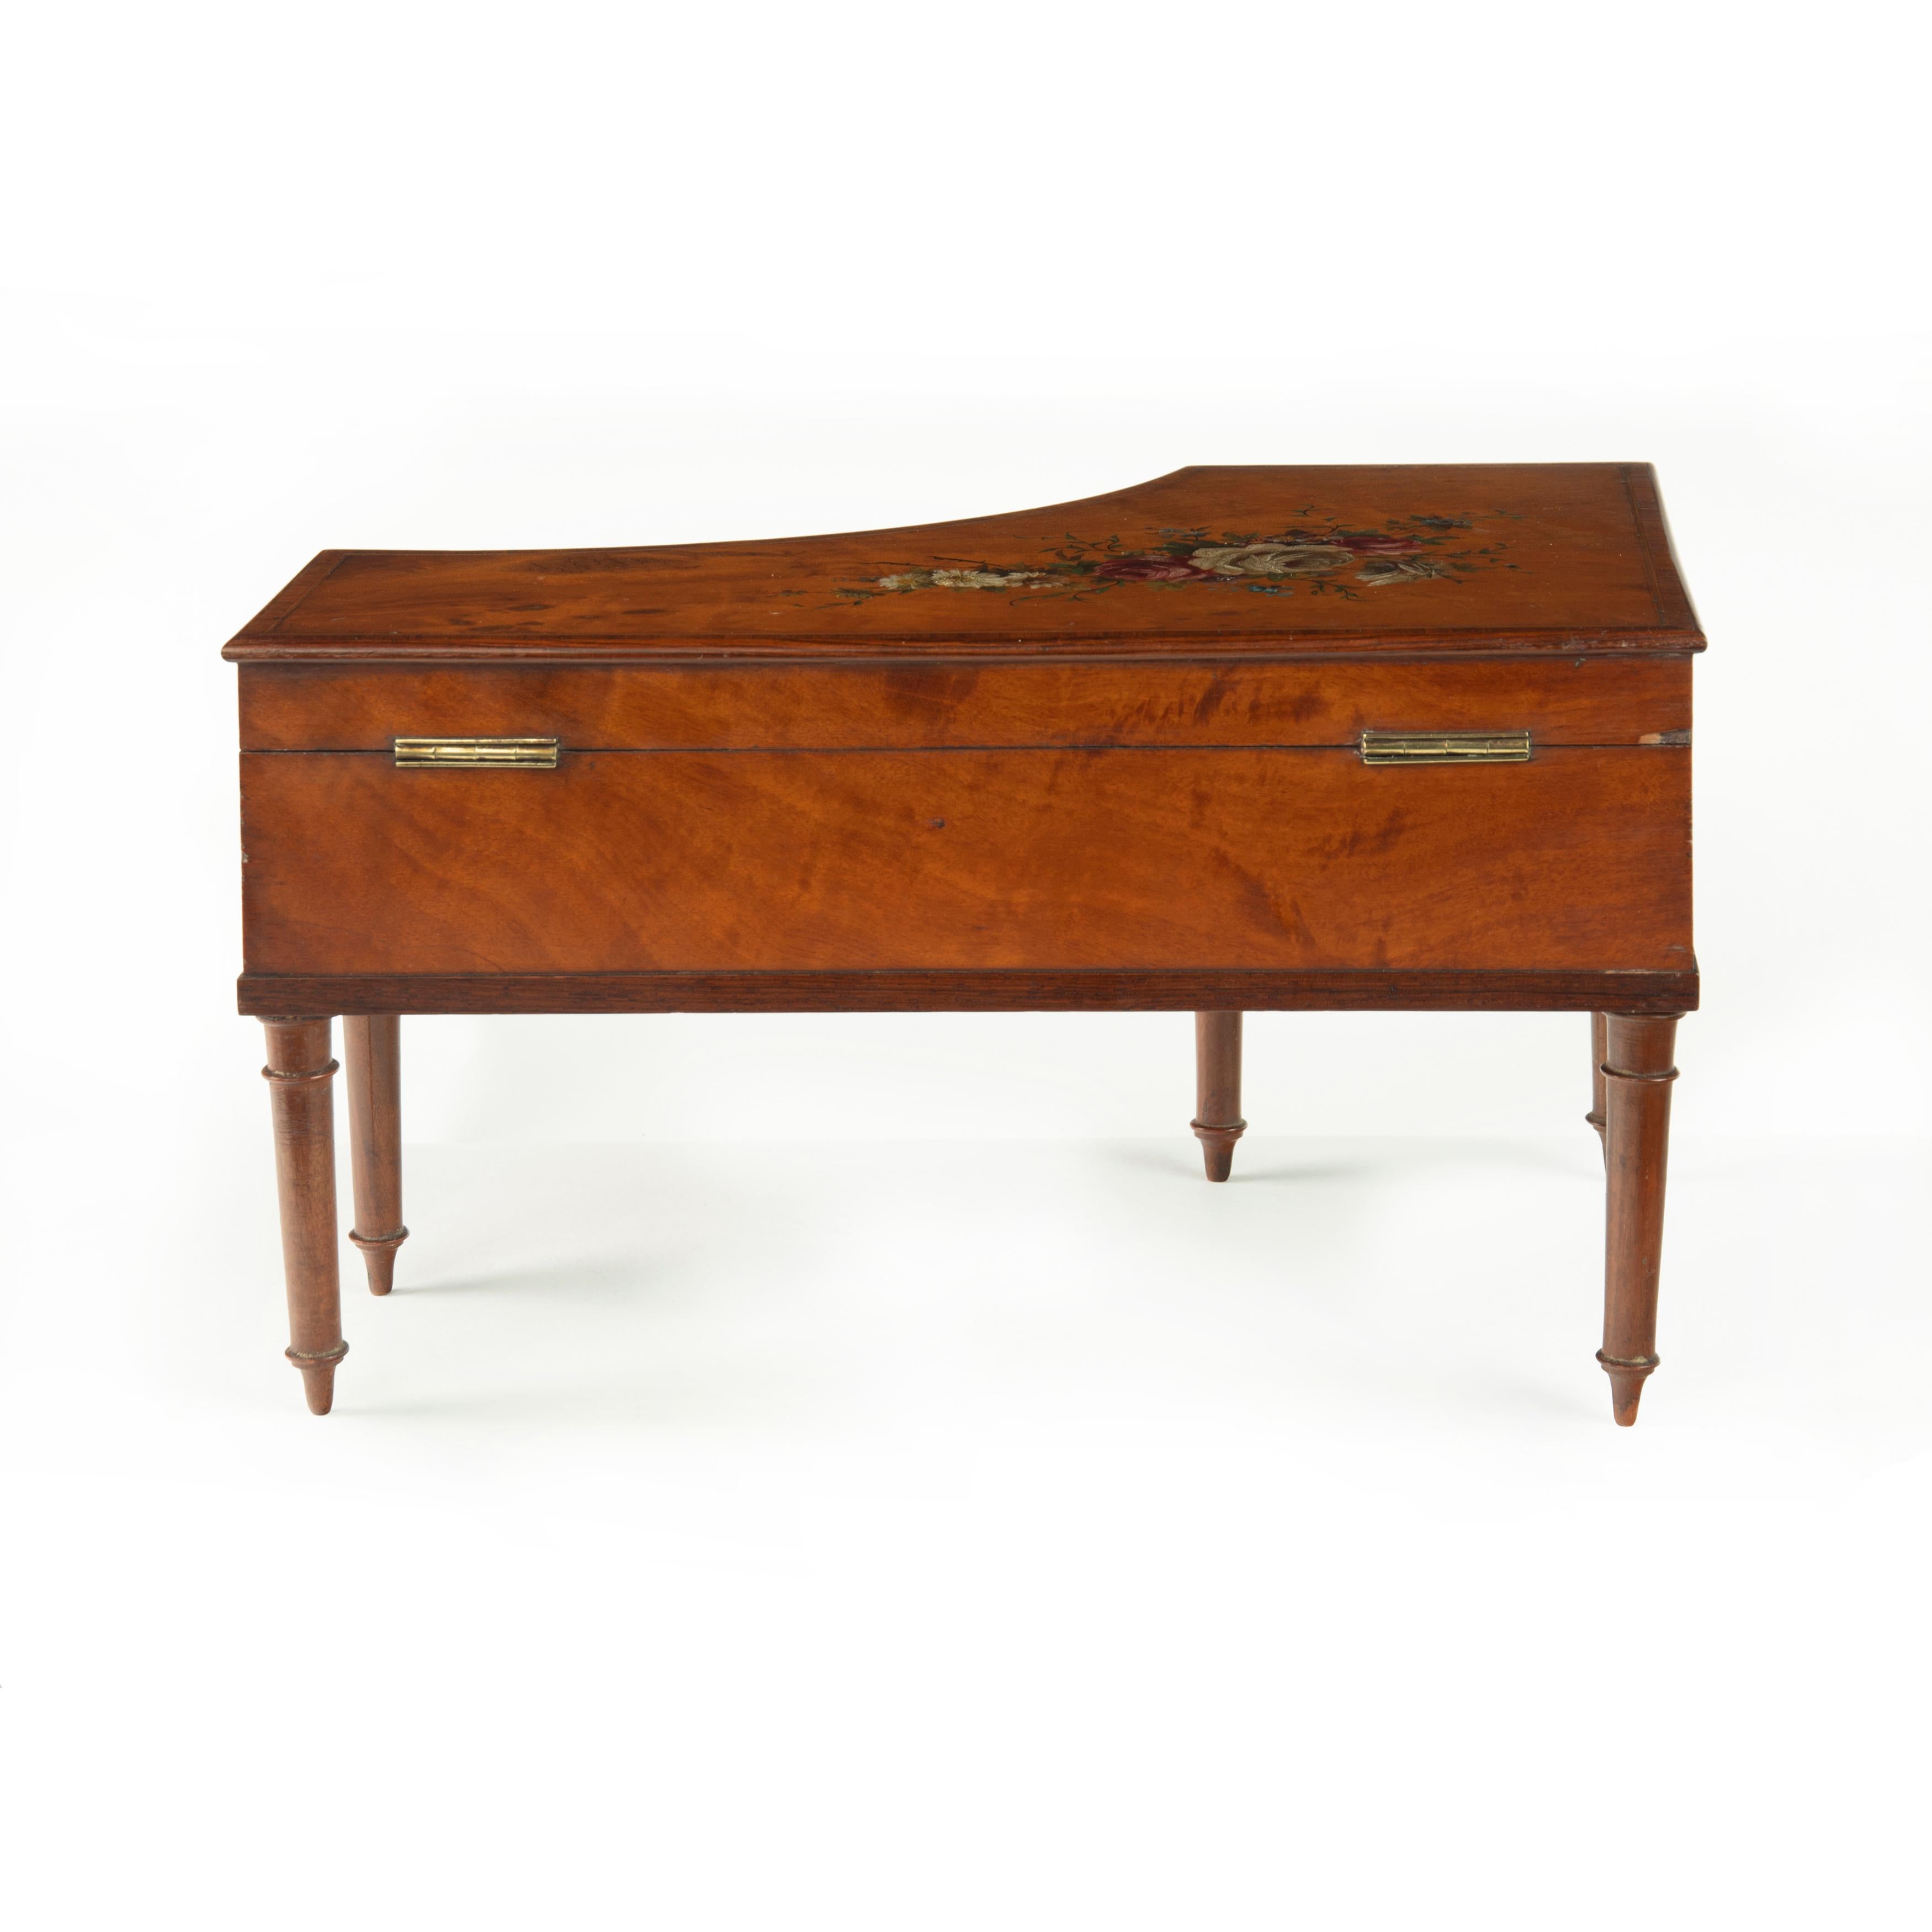 Late 19th Century Irish Miniature Satinwood Piano Sewing Box Painted by Herbert Cooper For Sale